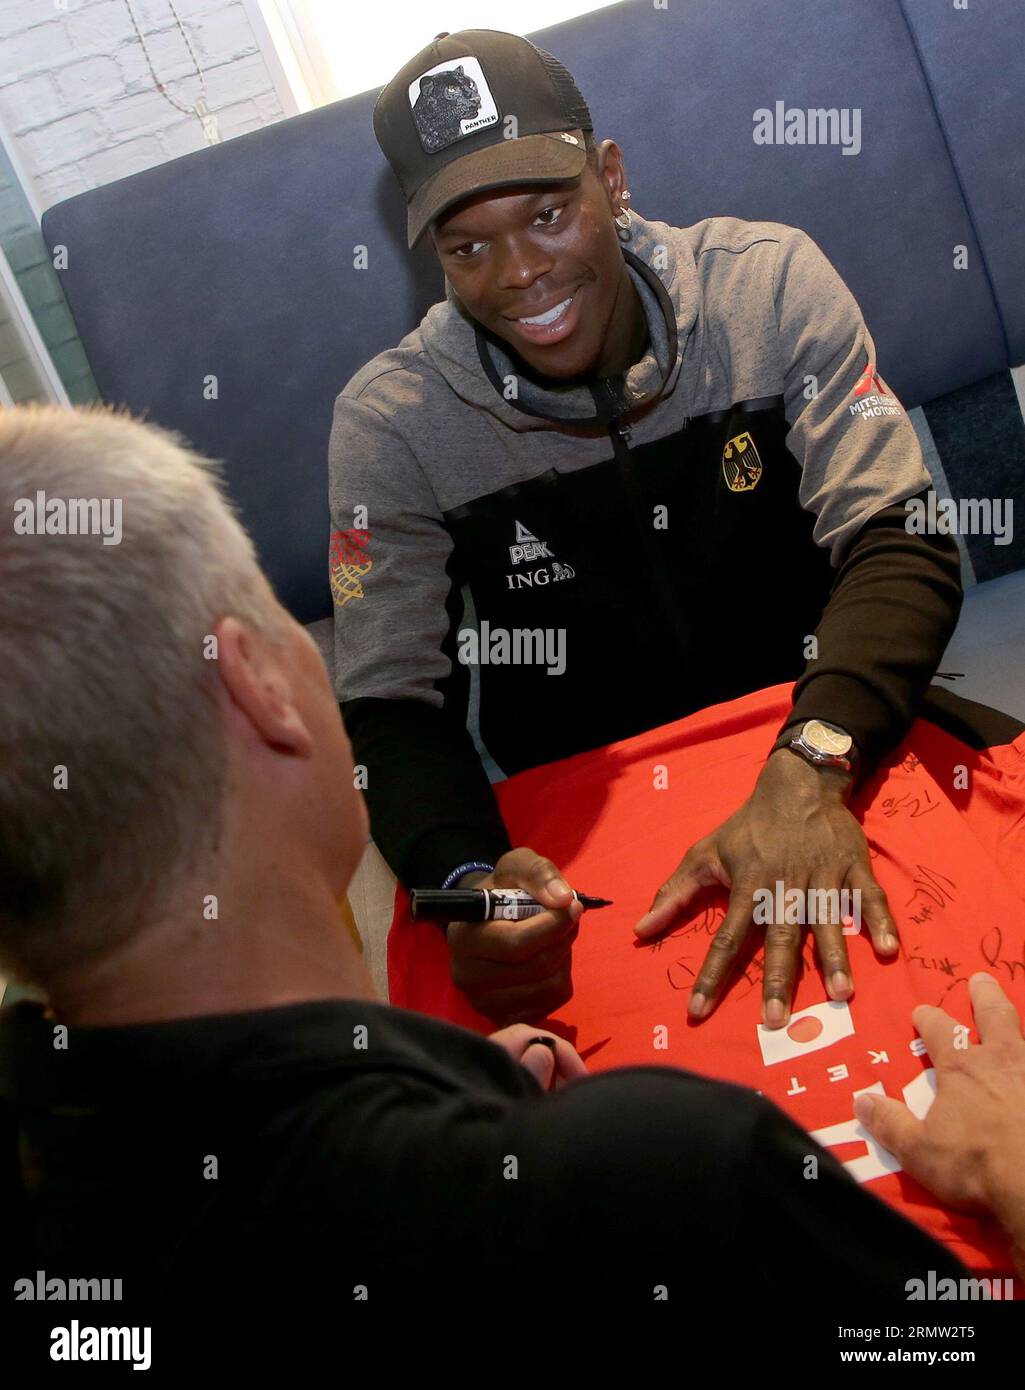 Okinawa, Japan. 30th Aug, 2023. Dennis Schroeder signs an autograph for a fan during a meeting of the German national basketball team with fans. The German basketball players are enjoying a day off at the World Basketball Championships on Wednesday. Credit: Matthias Stickel/dpa/Alamy Live News Stock Photo